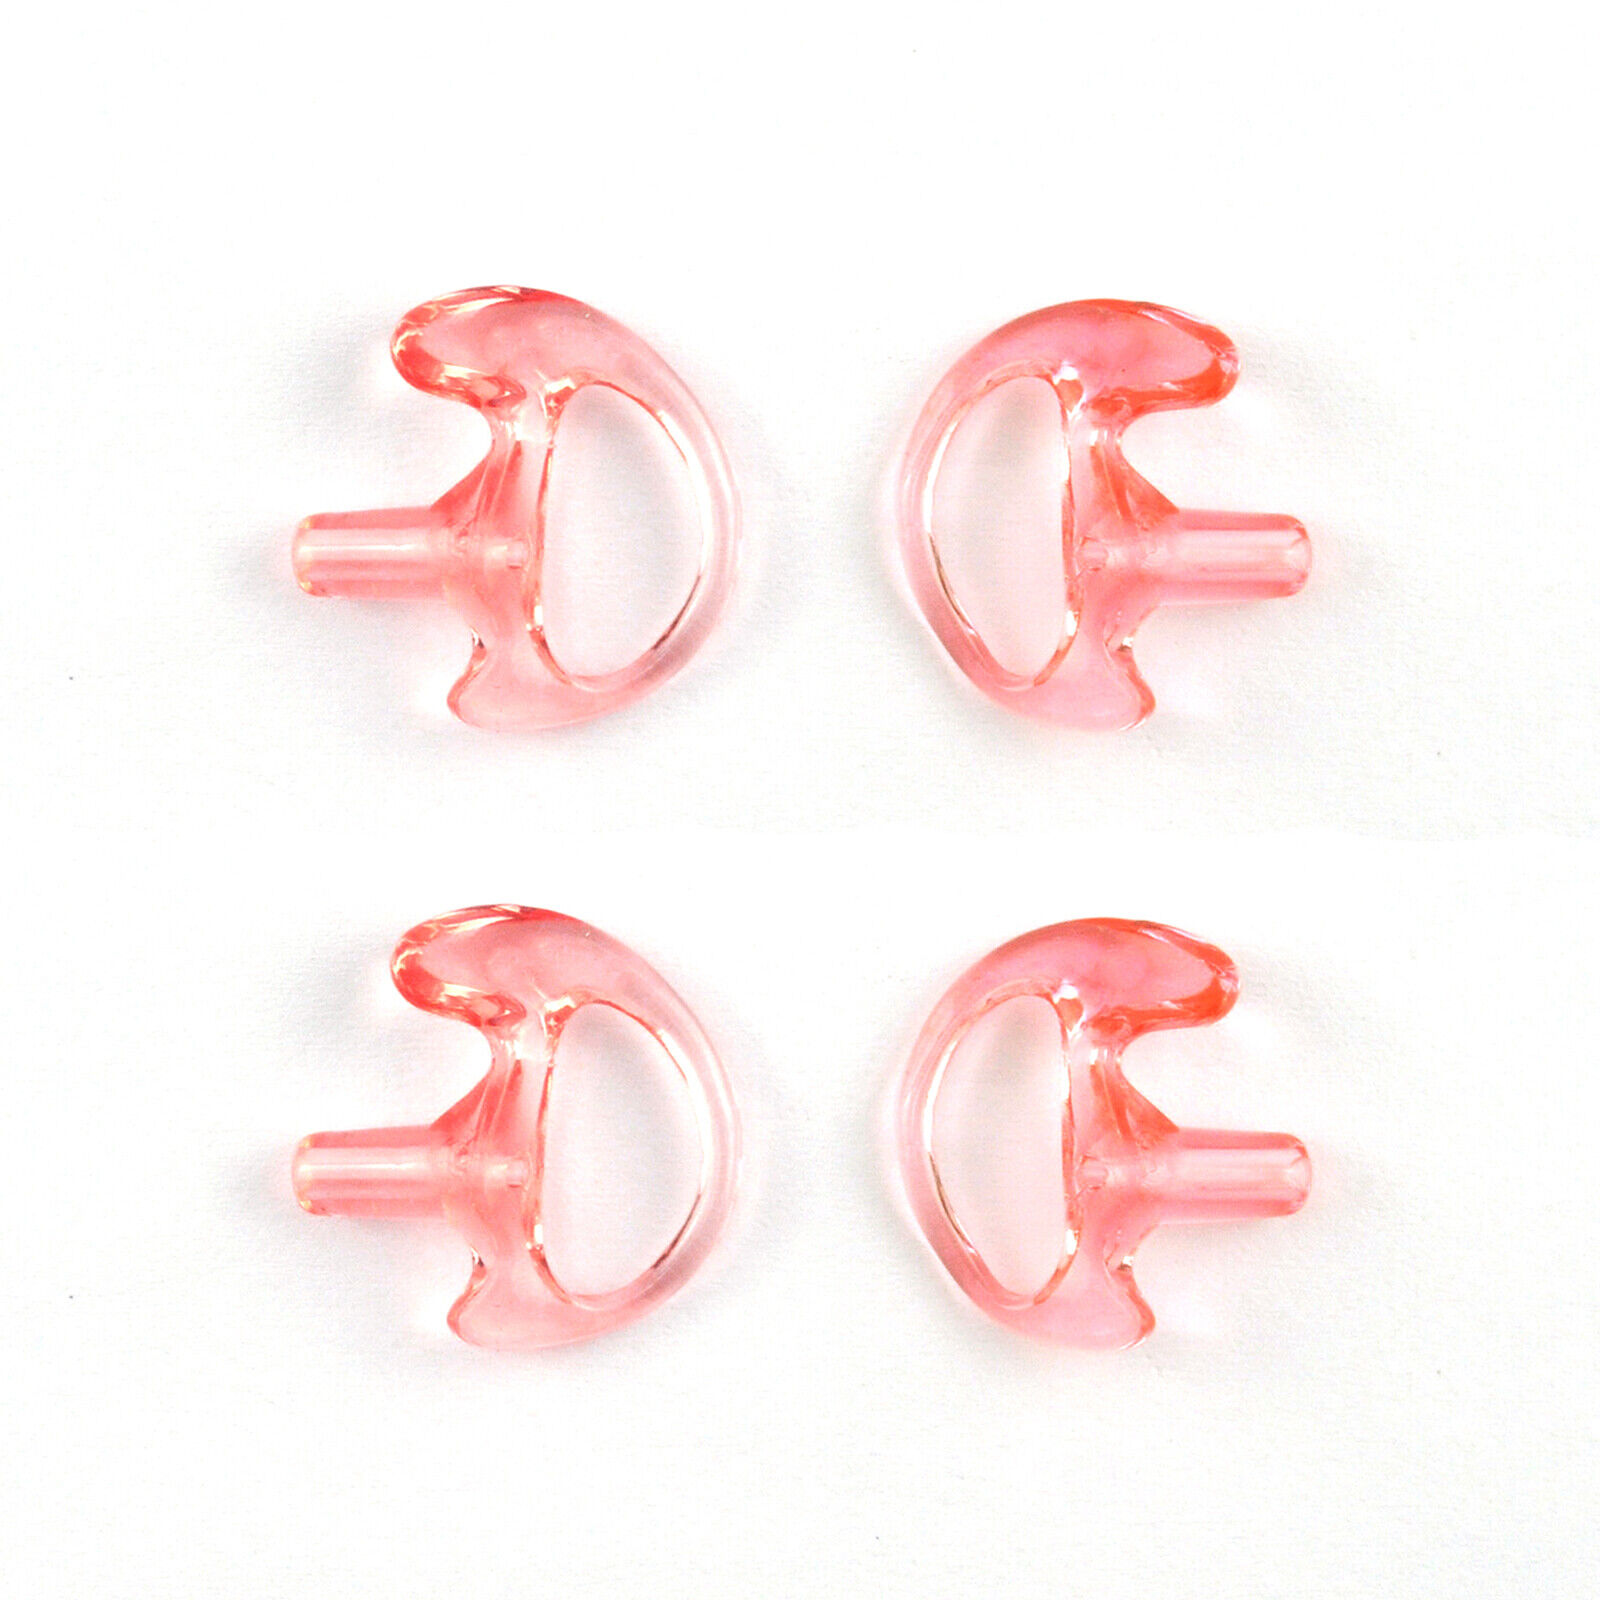 4-Pack Gel Ear Mold Excellent Inserts for Talkie Sales of SALE items from new works Way Two Walkie Acou Radio